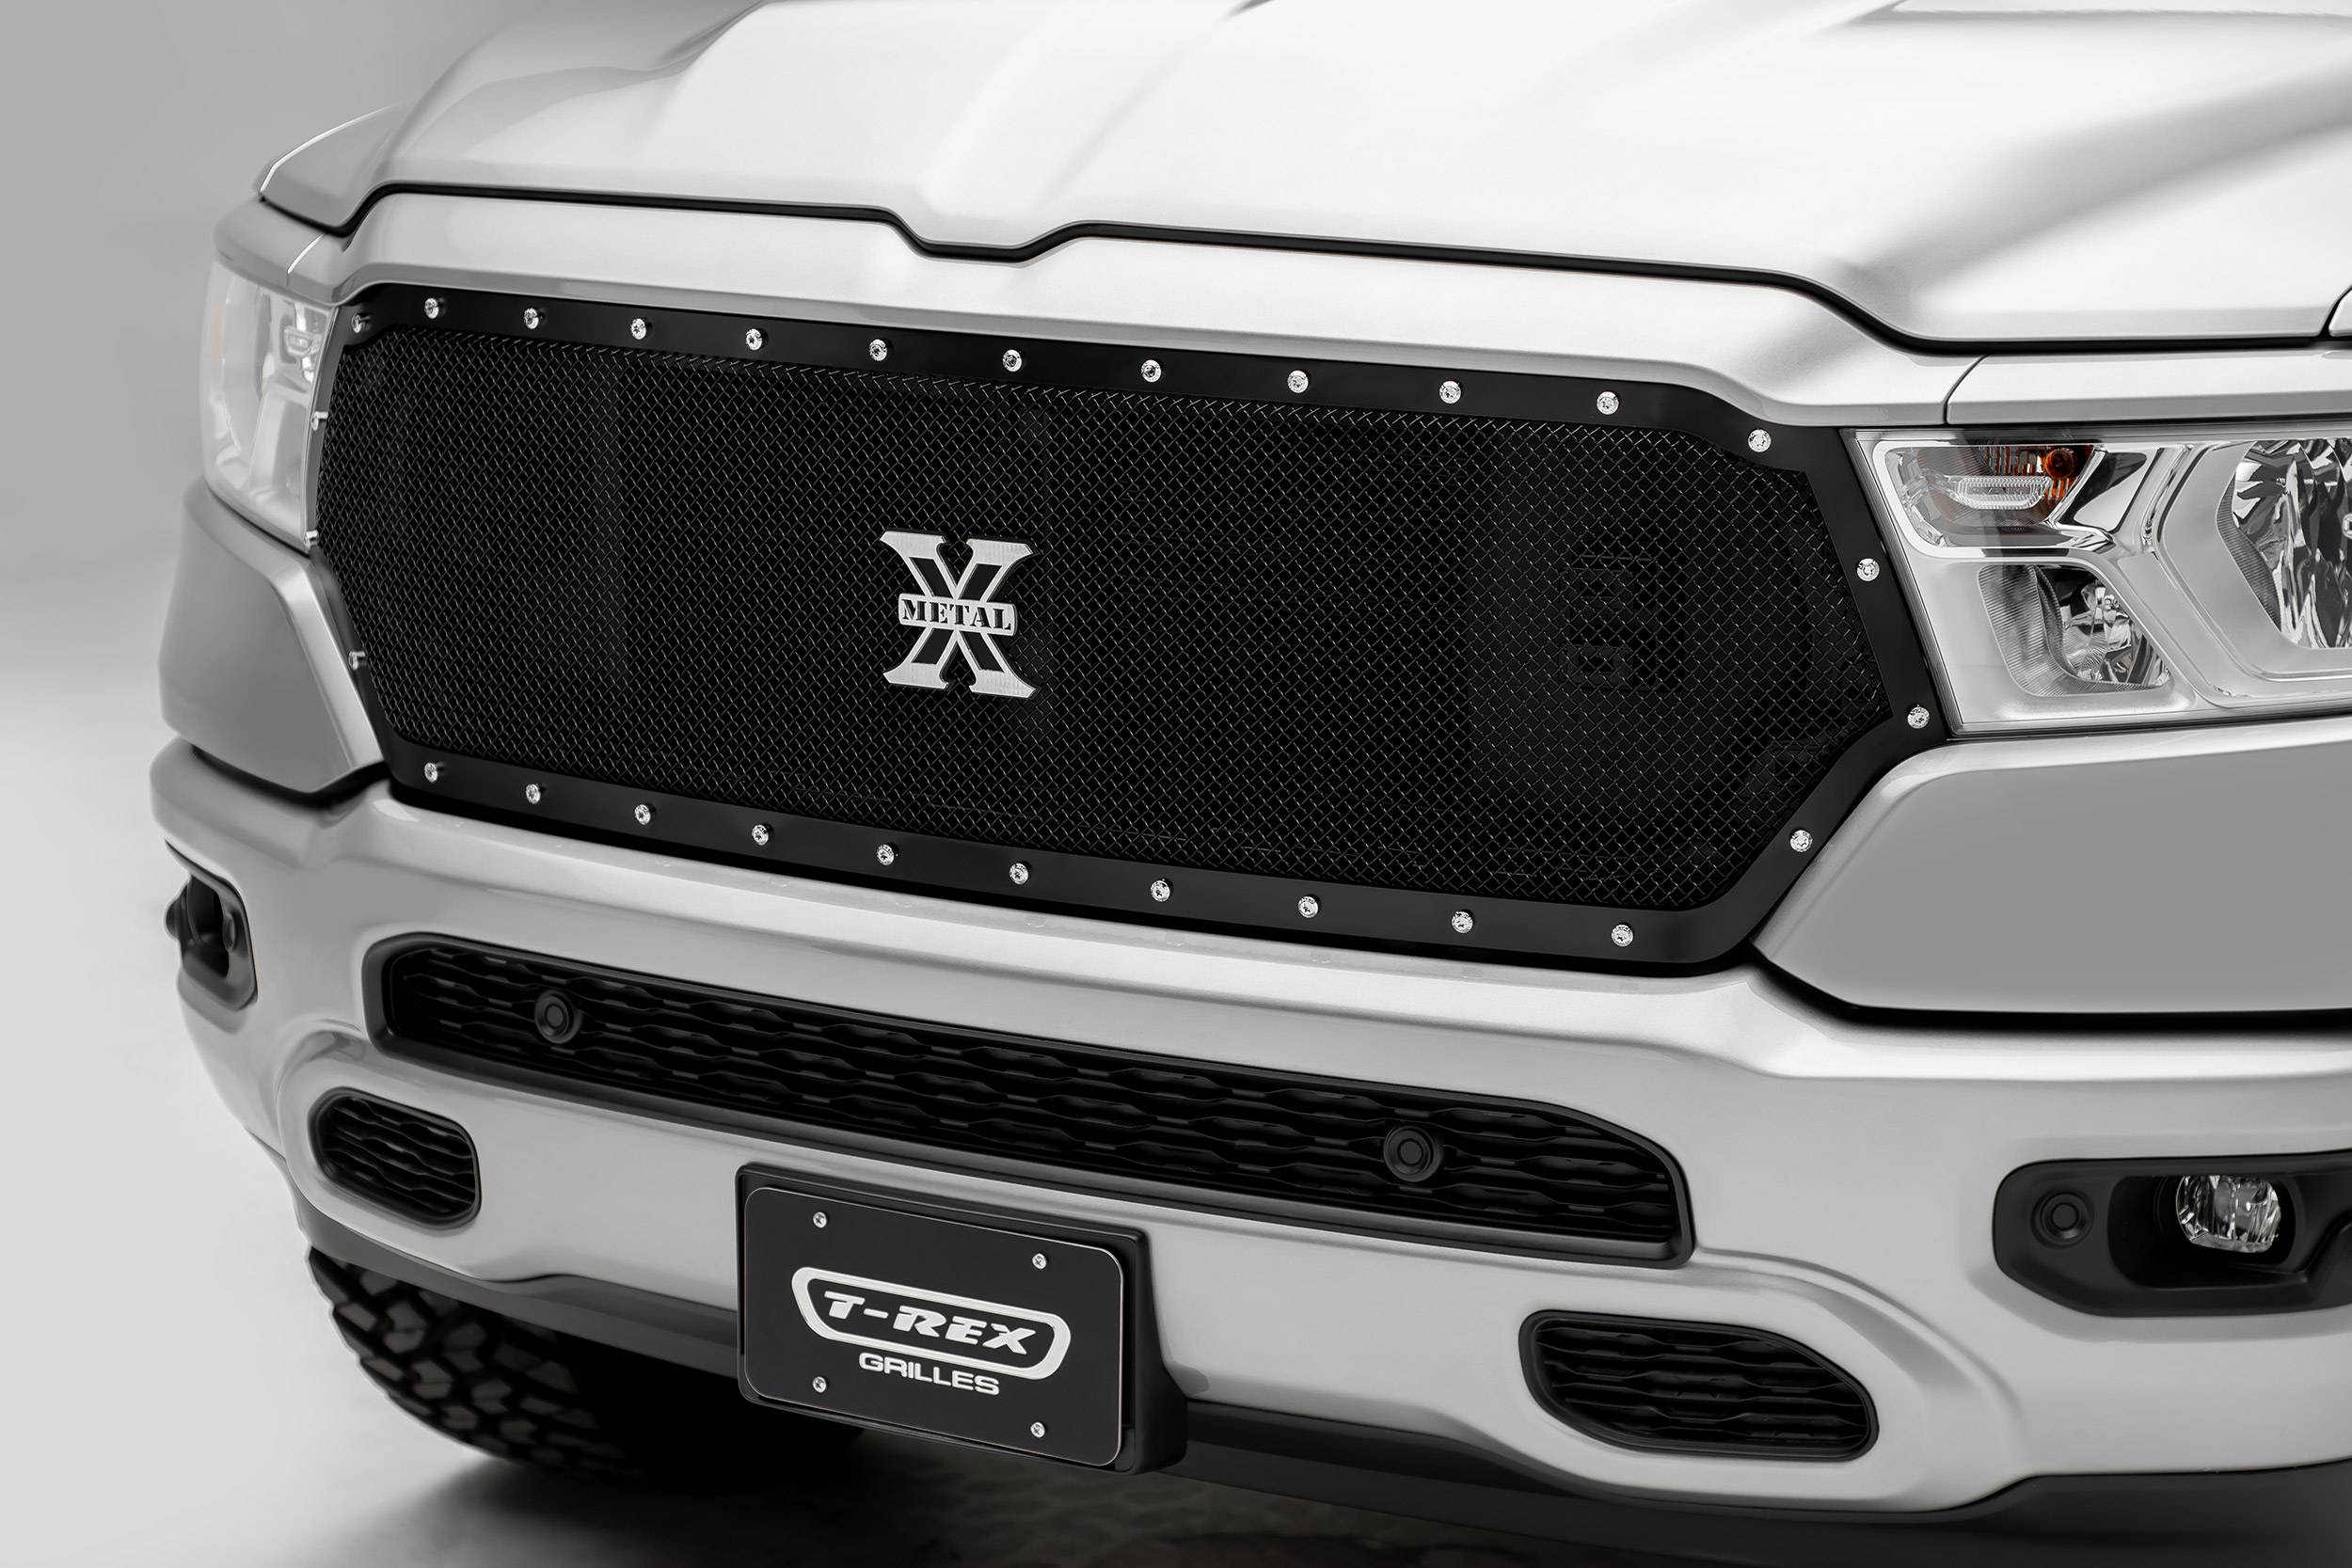 T-REX Grilles - 2019-2021 Ram 1500 Laramie, Lone Star, Big Horn, Tradesman X-Metal Grille, Black, 1 Pc, Replacement, Chrome Studs, Does Not Fit Vehicles with Camera - Part # 6714651